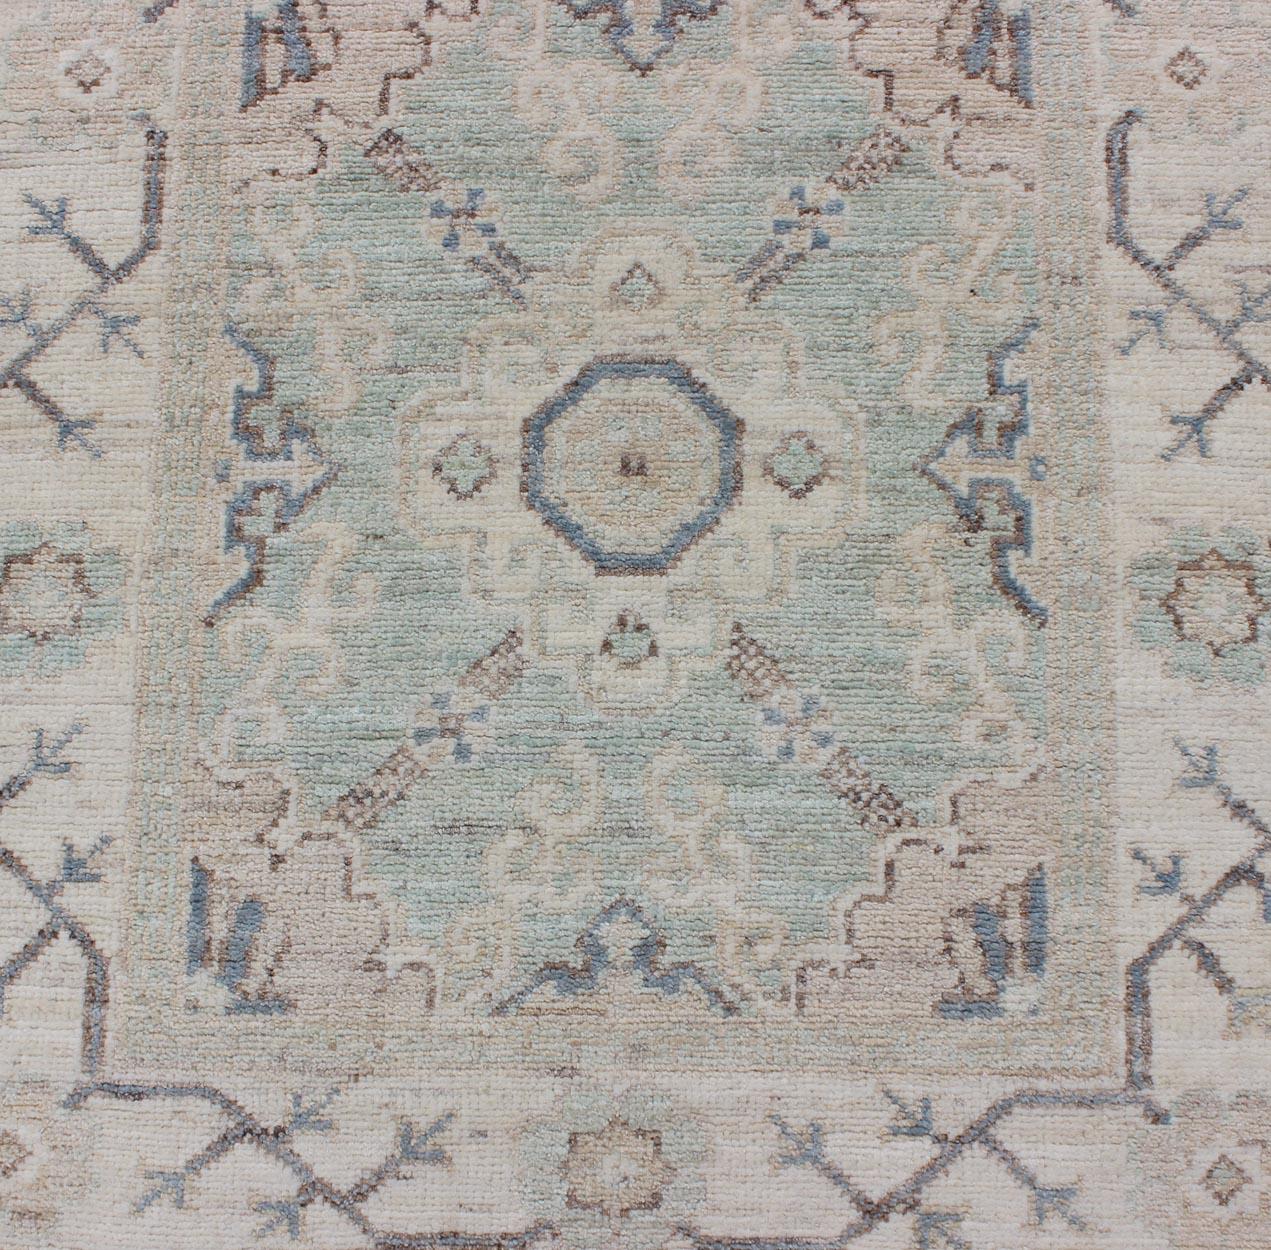 Contemporary Keivan Woven Arts Afghan Khotan Runner with Geometric Design For Sale